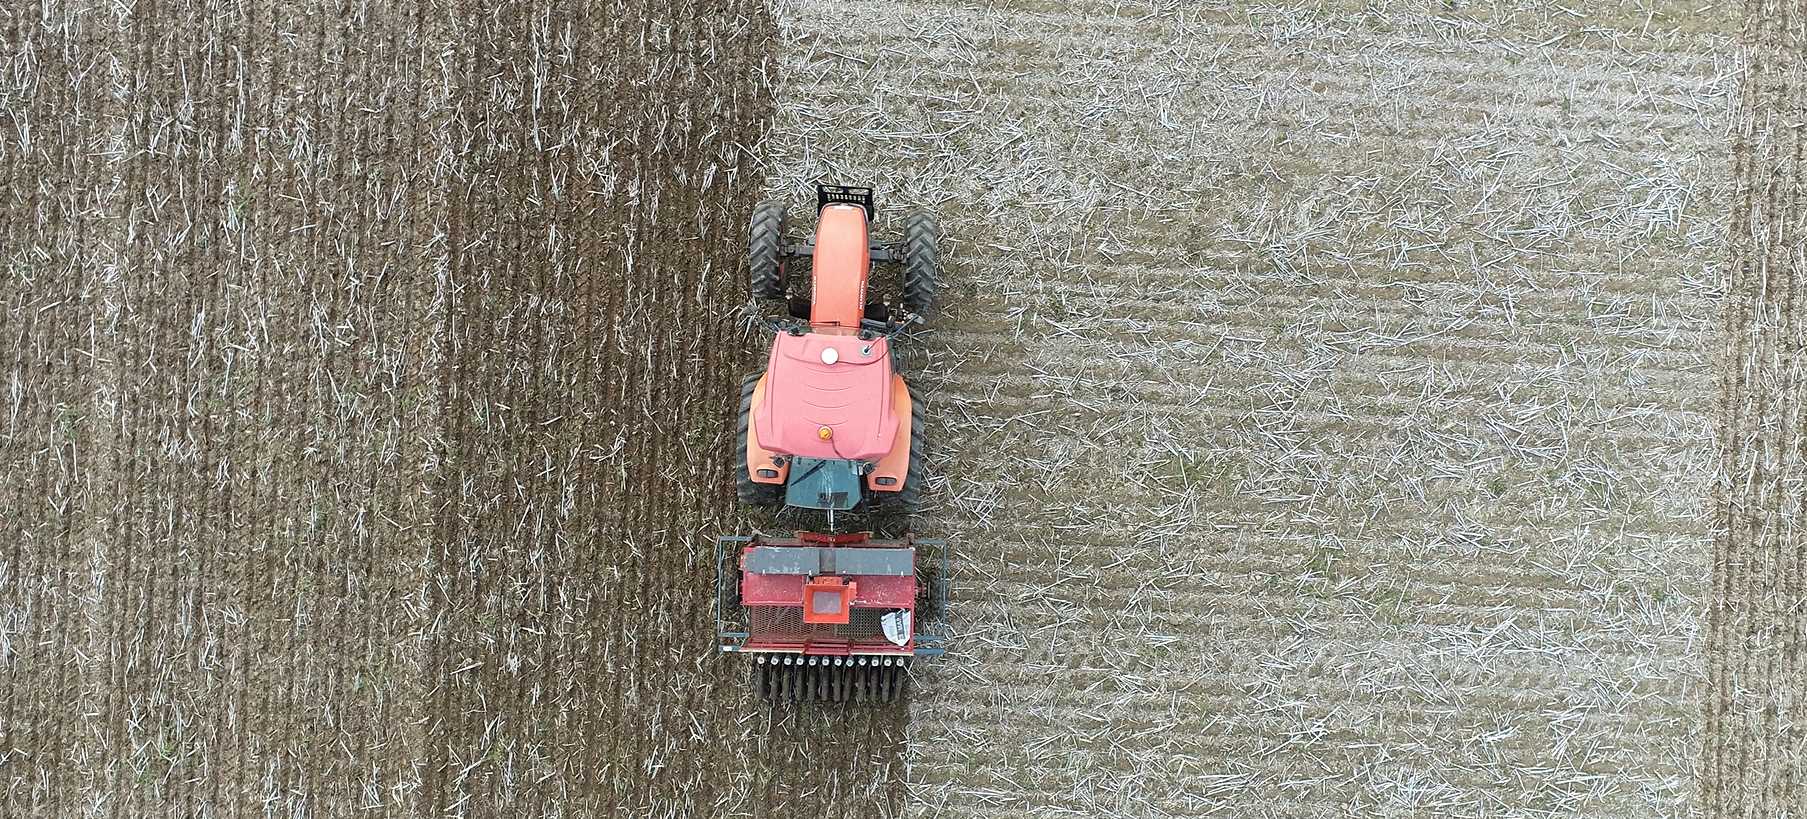 Drone shot of tractor sowing seed in a test plot